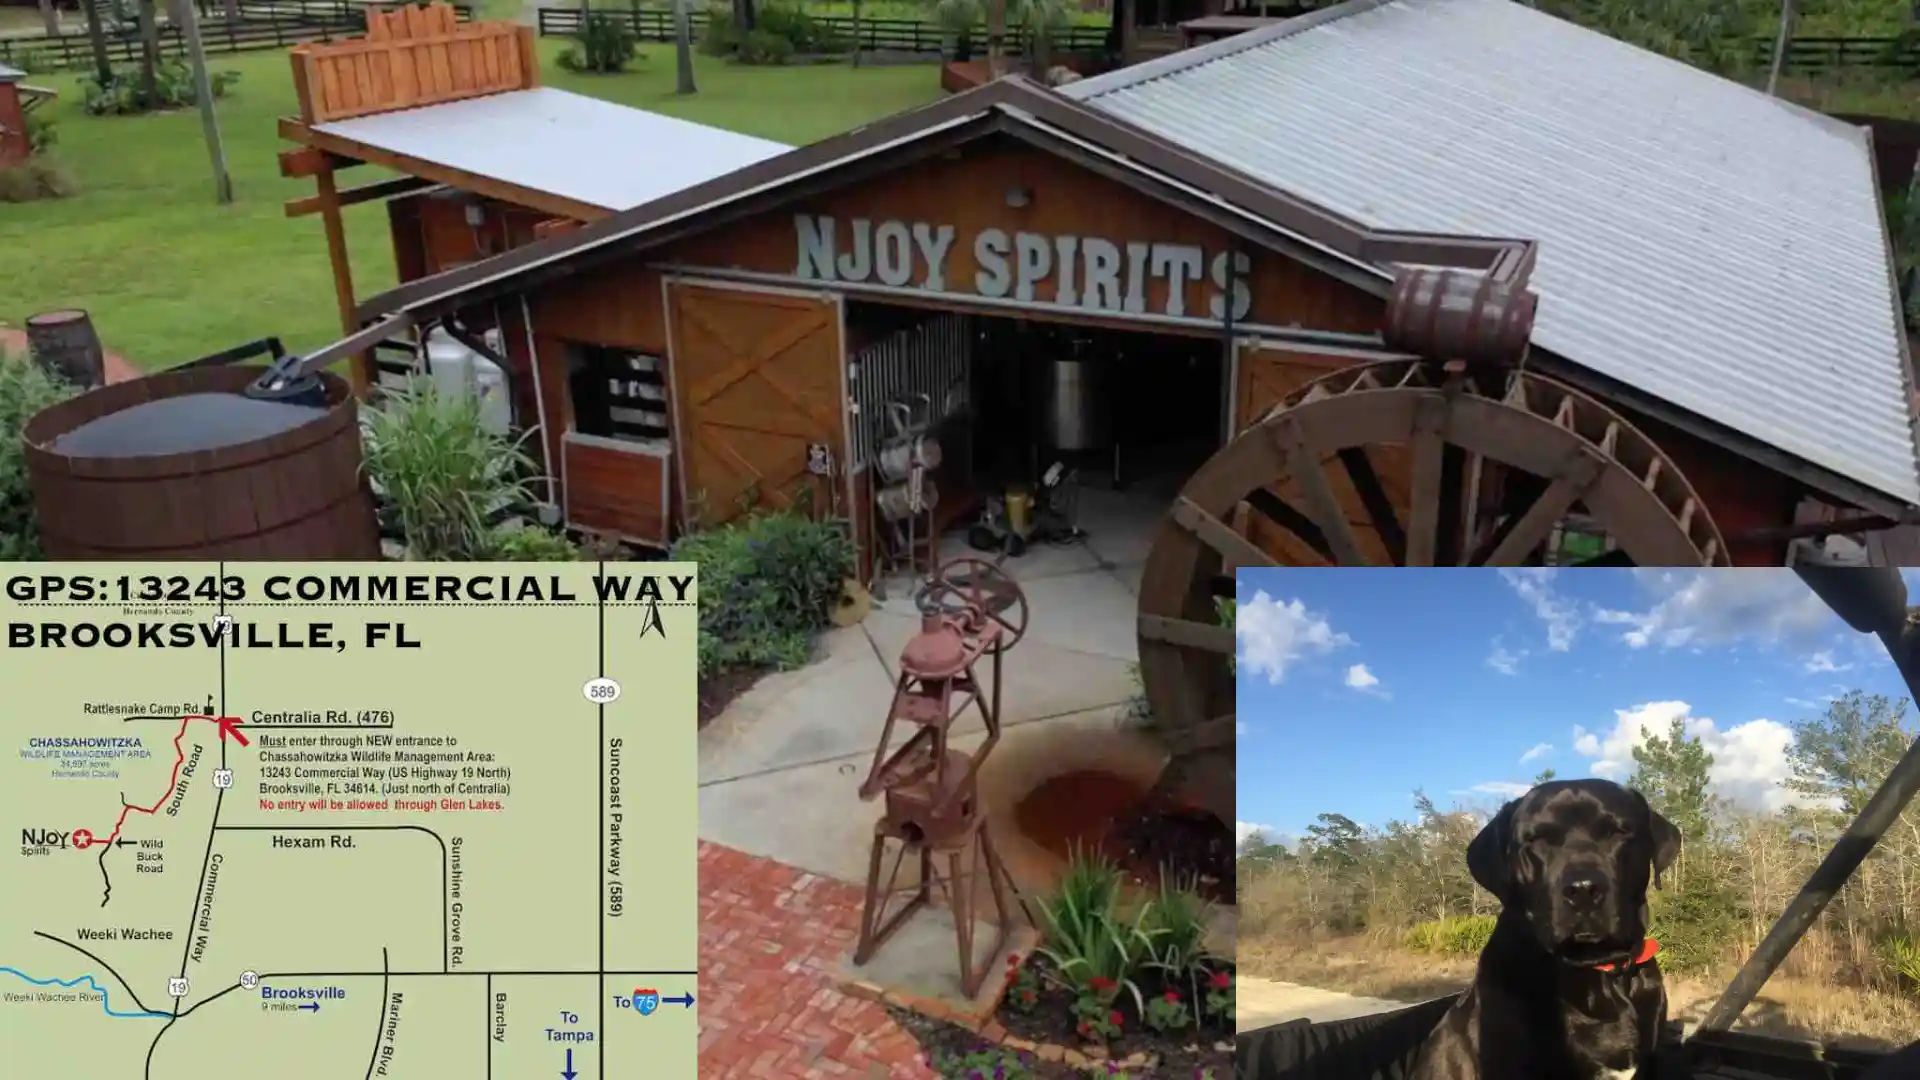 EVENT - 20210828-29 - NJOY DISTILLERY BARN ARIAL + MAP + NATIONAL DOG DAY WEEKEND 1920x1080